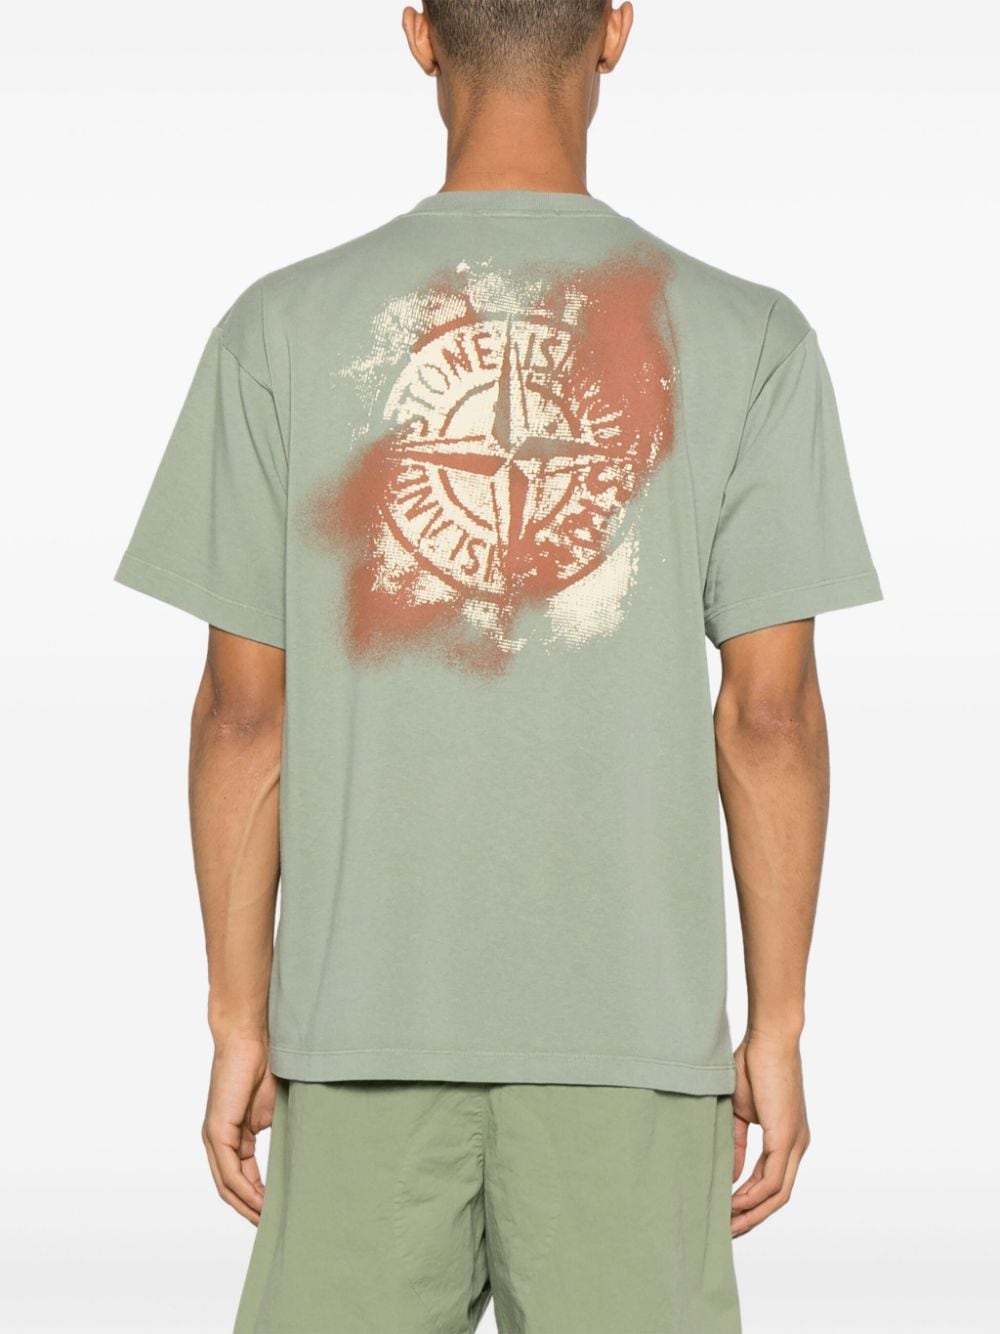 Stone Island - T-Shirt sage 2RC89 'SCRATCHED PAINT ONE' PRINT - Lothaire